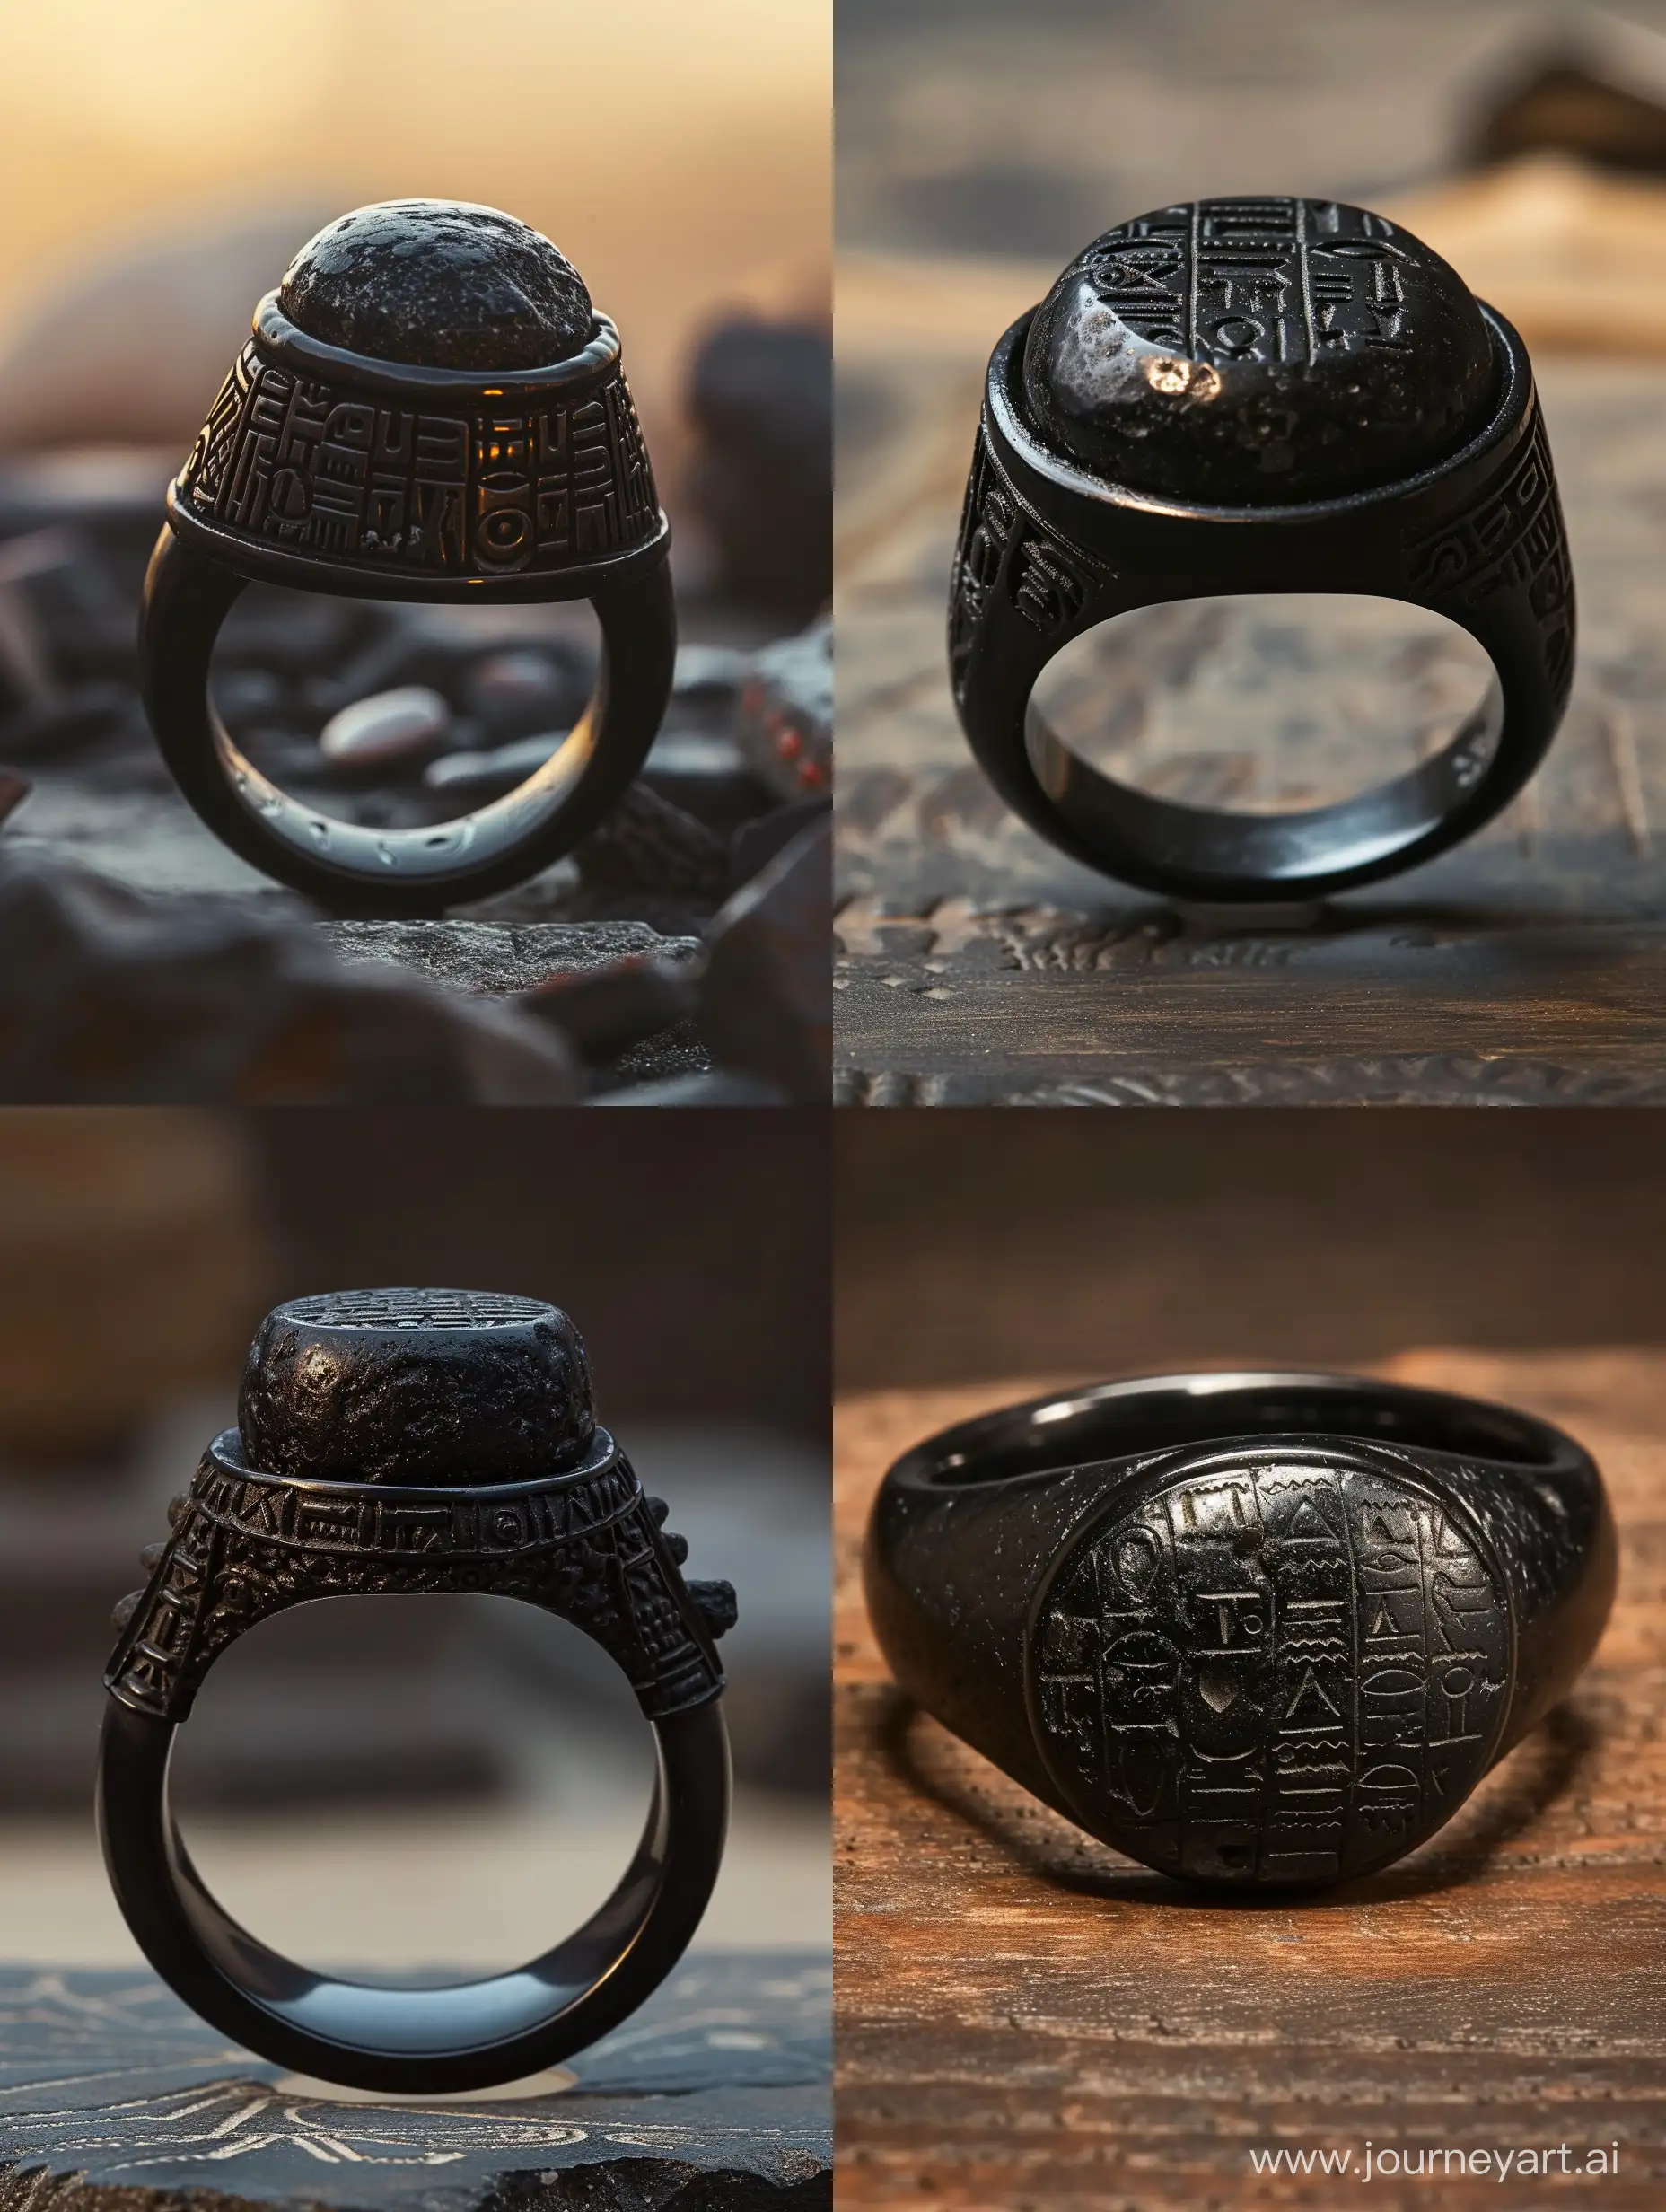 A black ring with big black stone on it,cuneiform letters on it,intricate carving,historic,incredible detail,warm light.